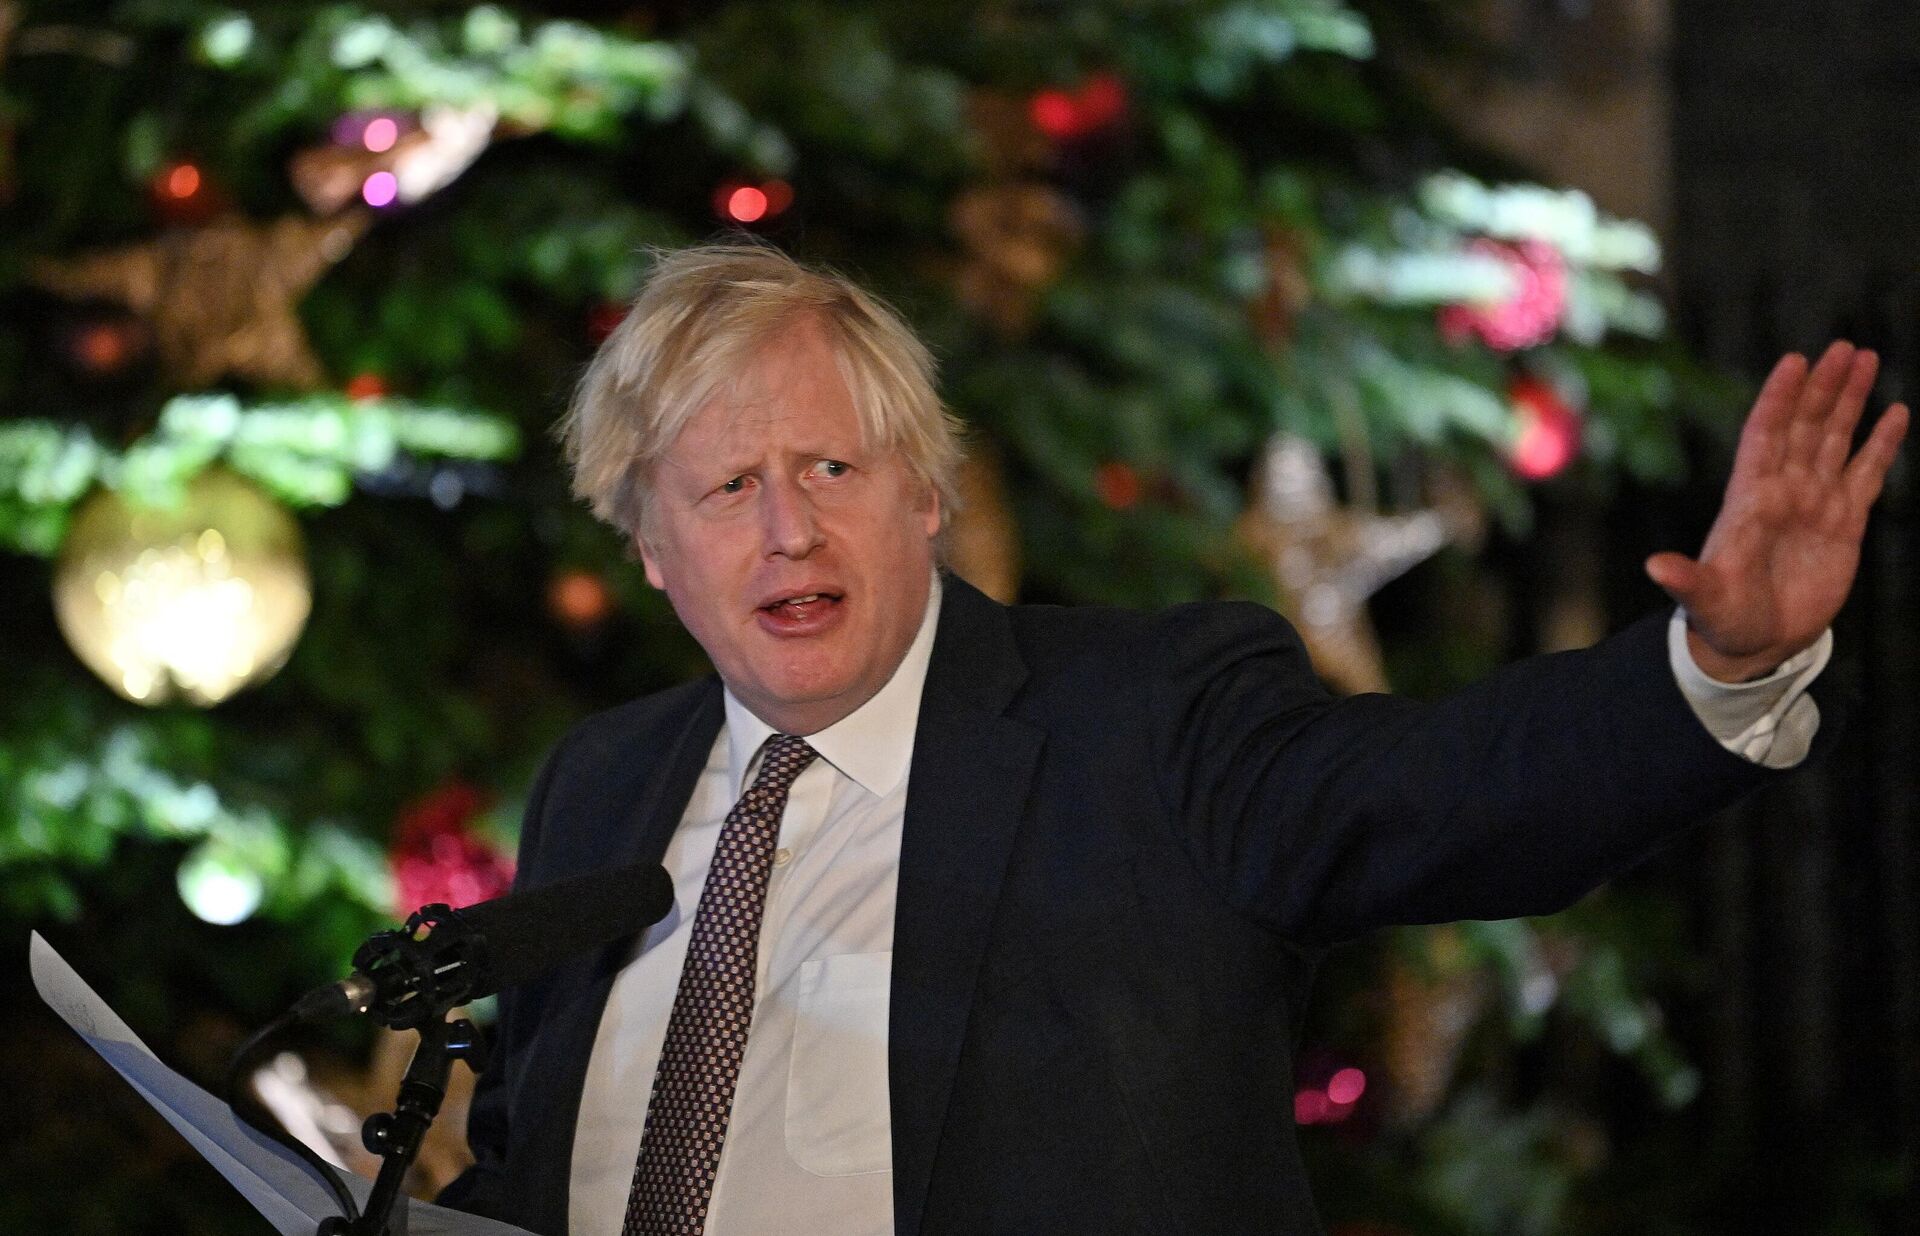 Britain's Prime Minister Boris Johnson makes a speech as he visits a UK Food and Drinks market set up in Downing Street, central London on November 30, 2021. (Photo by JUSTIN TALLIS / POOL / AFP) - Sputnik International, 1920, 18.12.2021